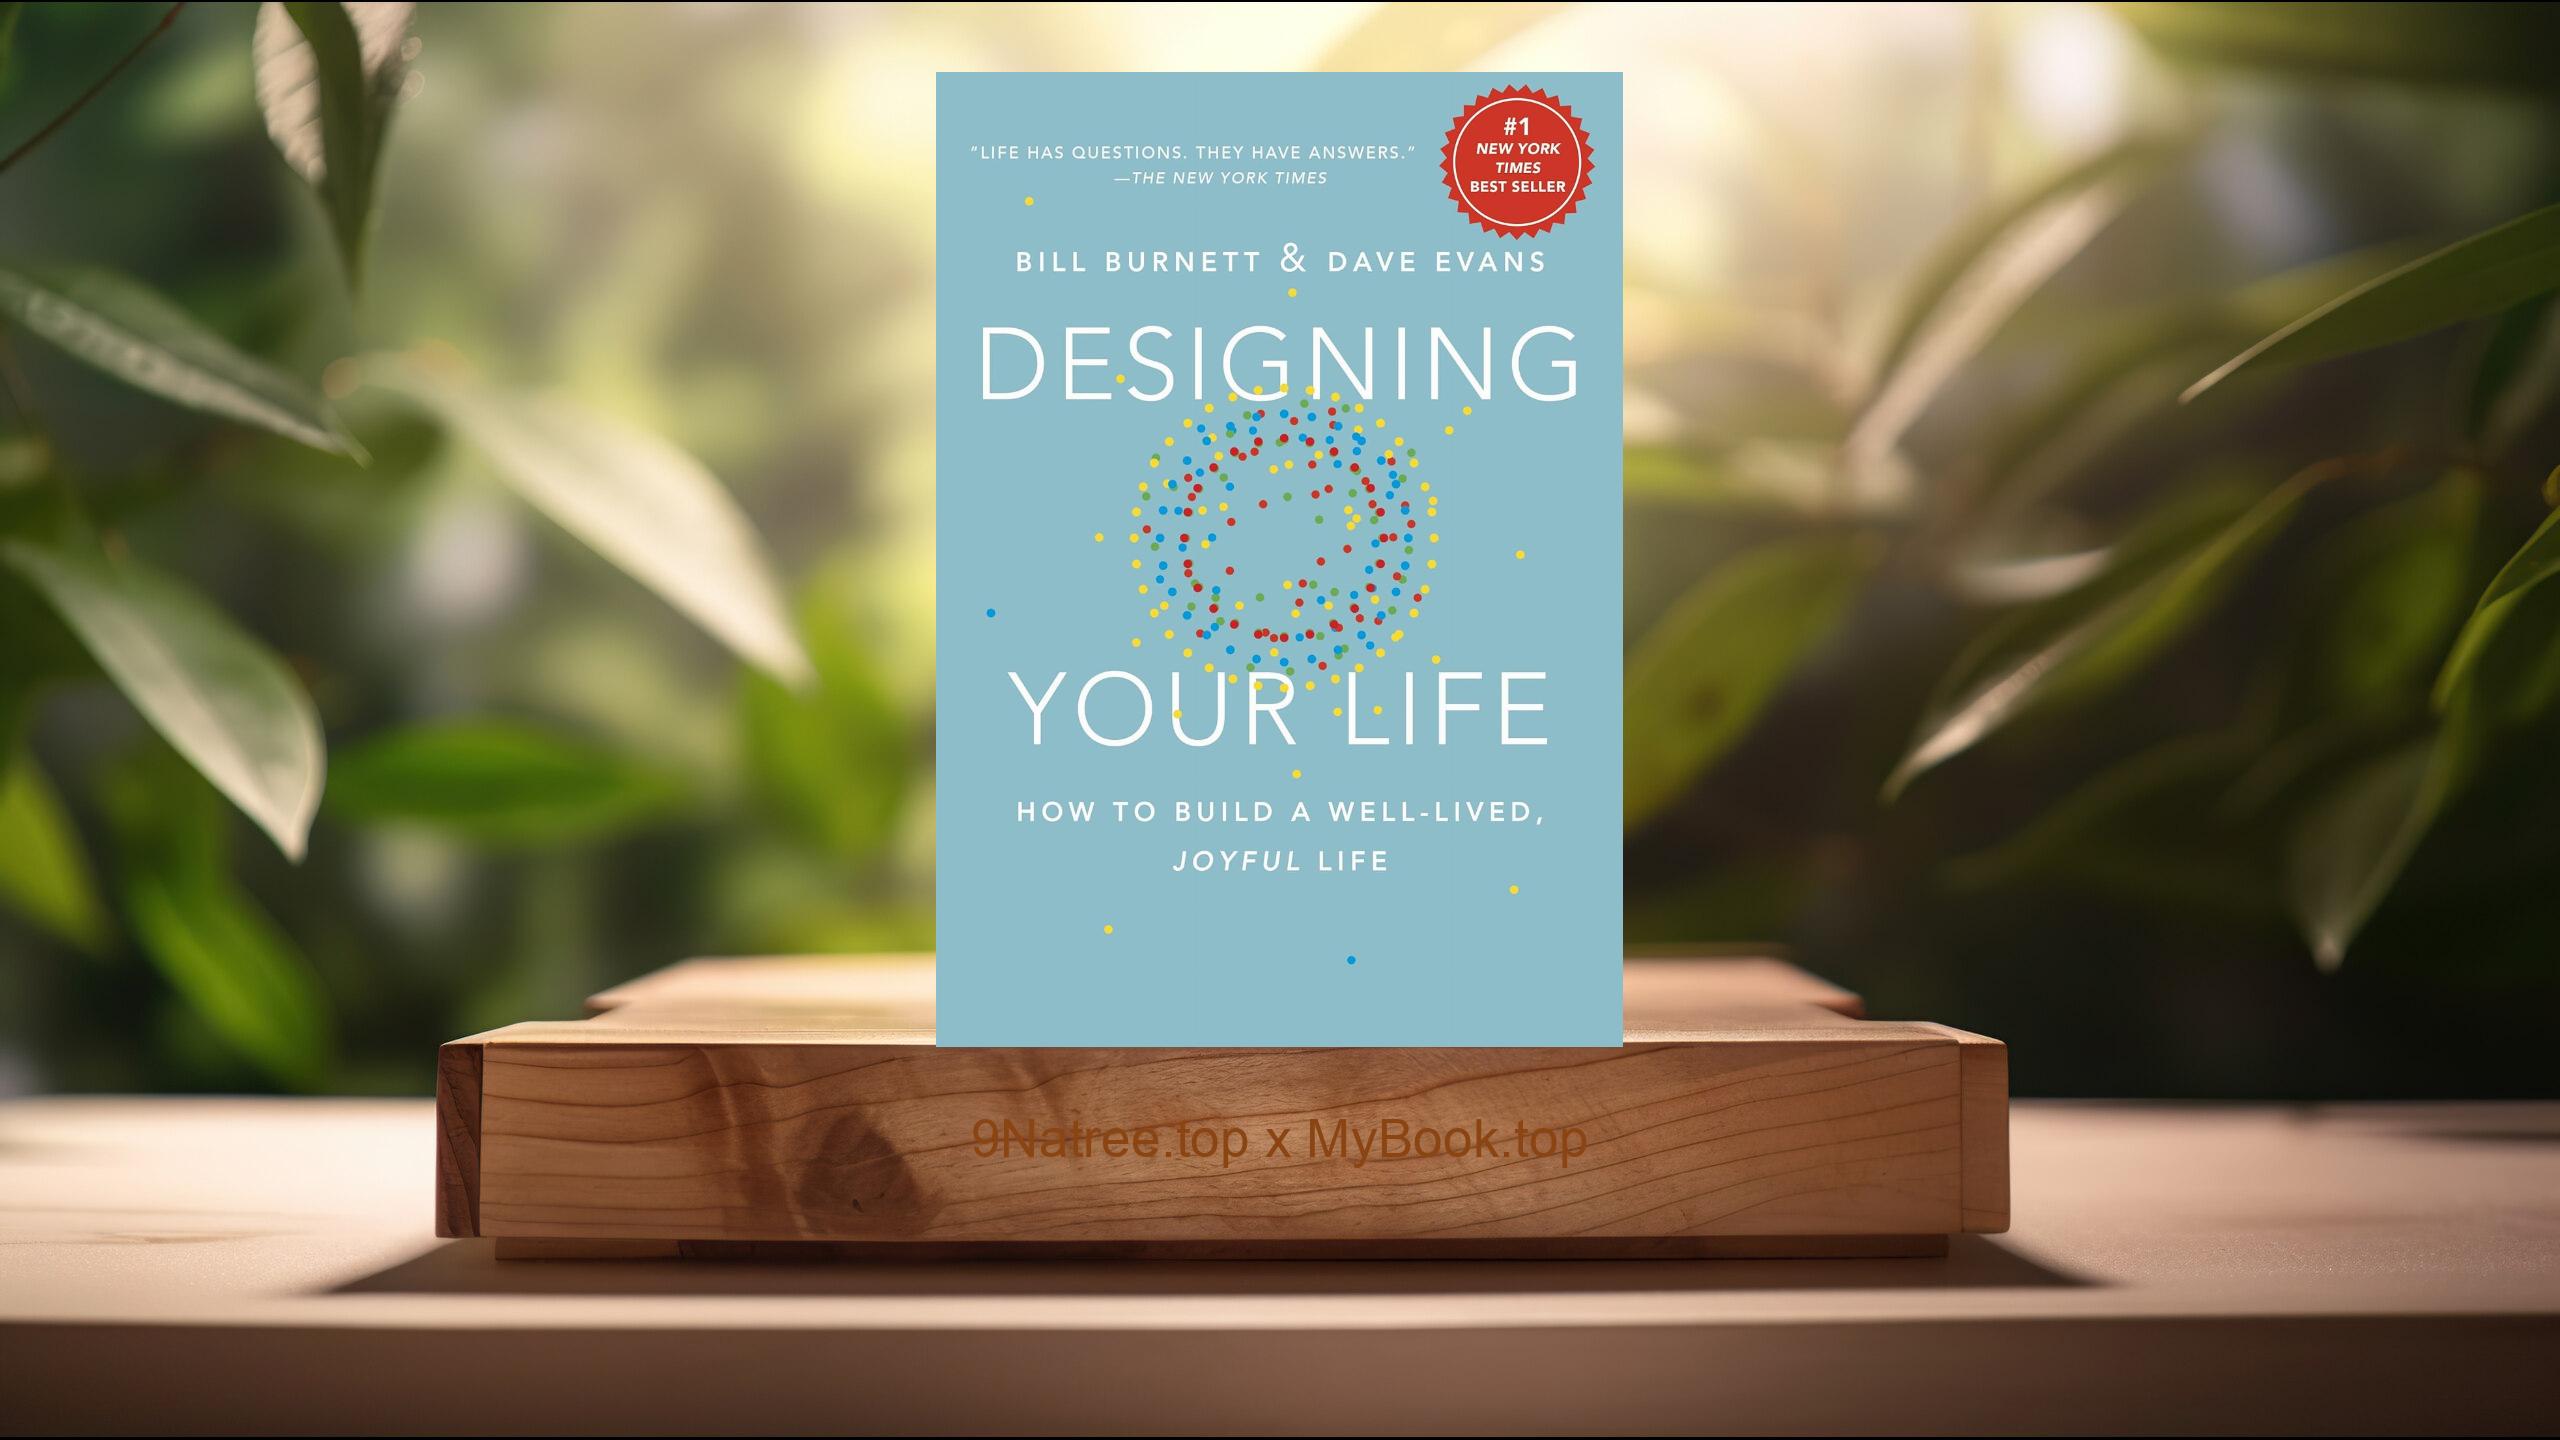 [Review] Designing Your Life: How to Build a Well-Lived, Joyful Life (Bill Burnett) Summarized